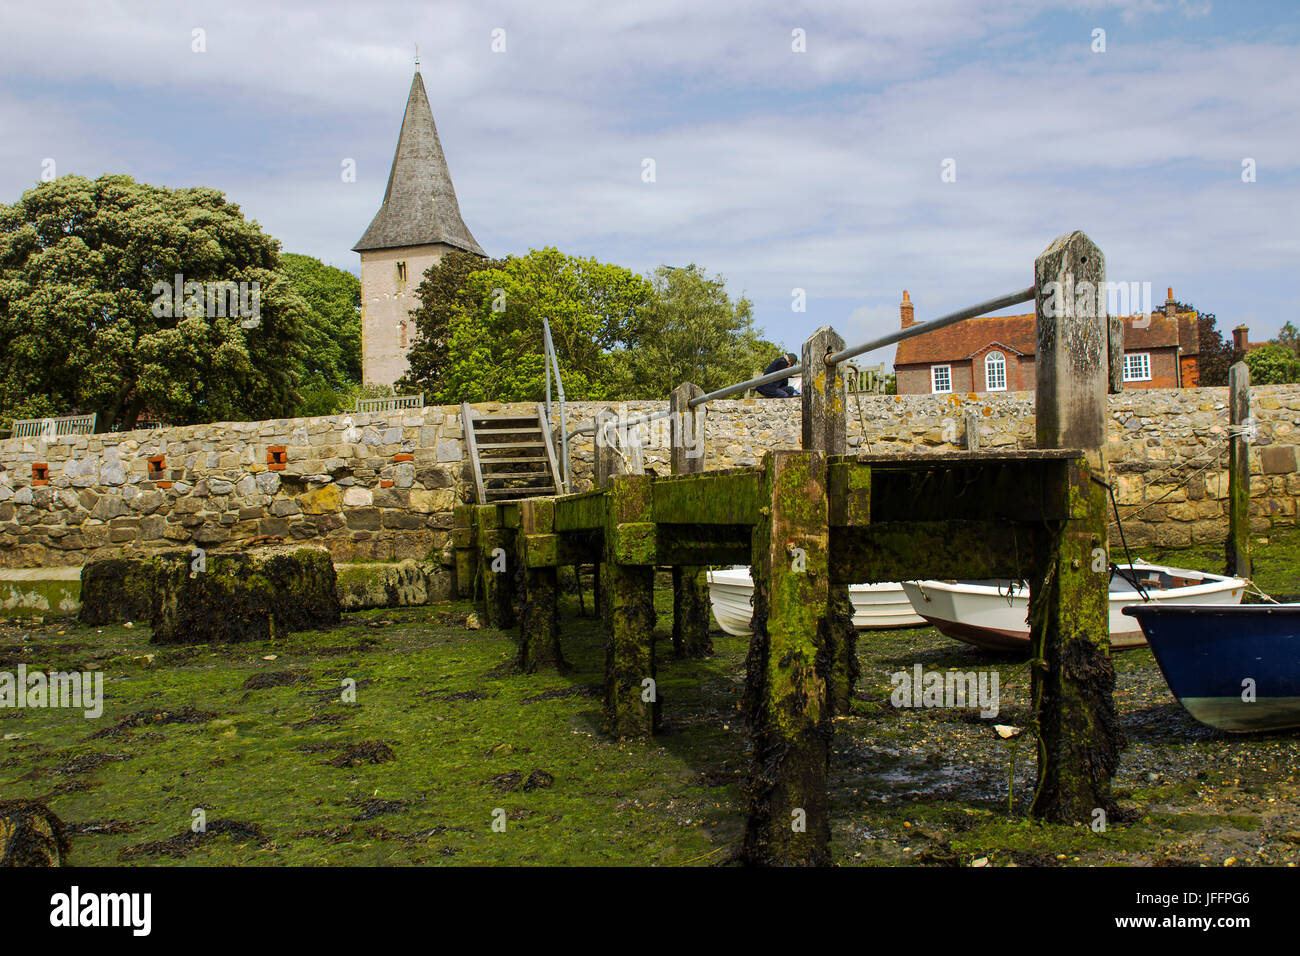 A small wooden jetty covered with barnacles and seaweed in the harbour at Bosham village in West sussex in the South of England Stock Photo